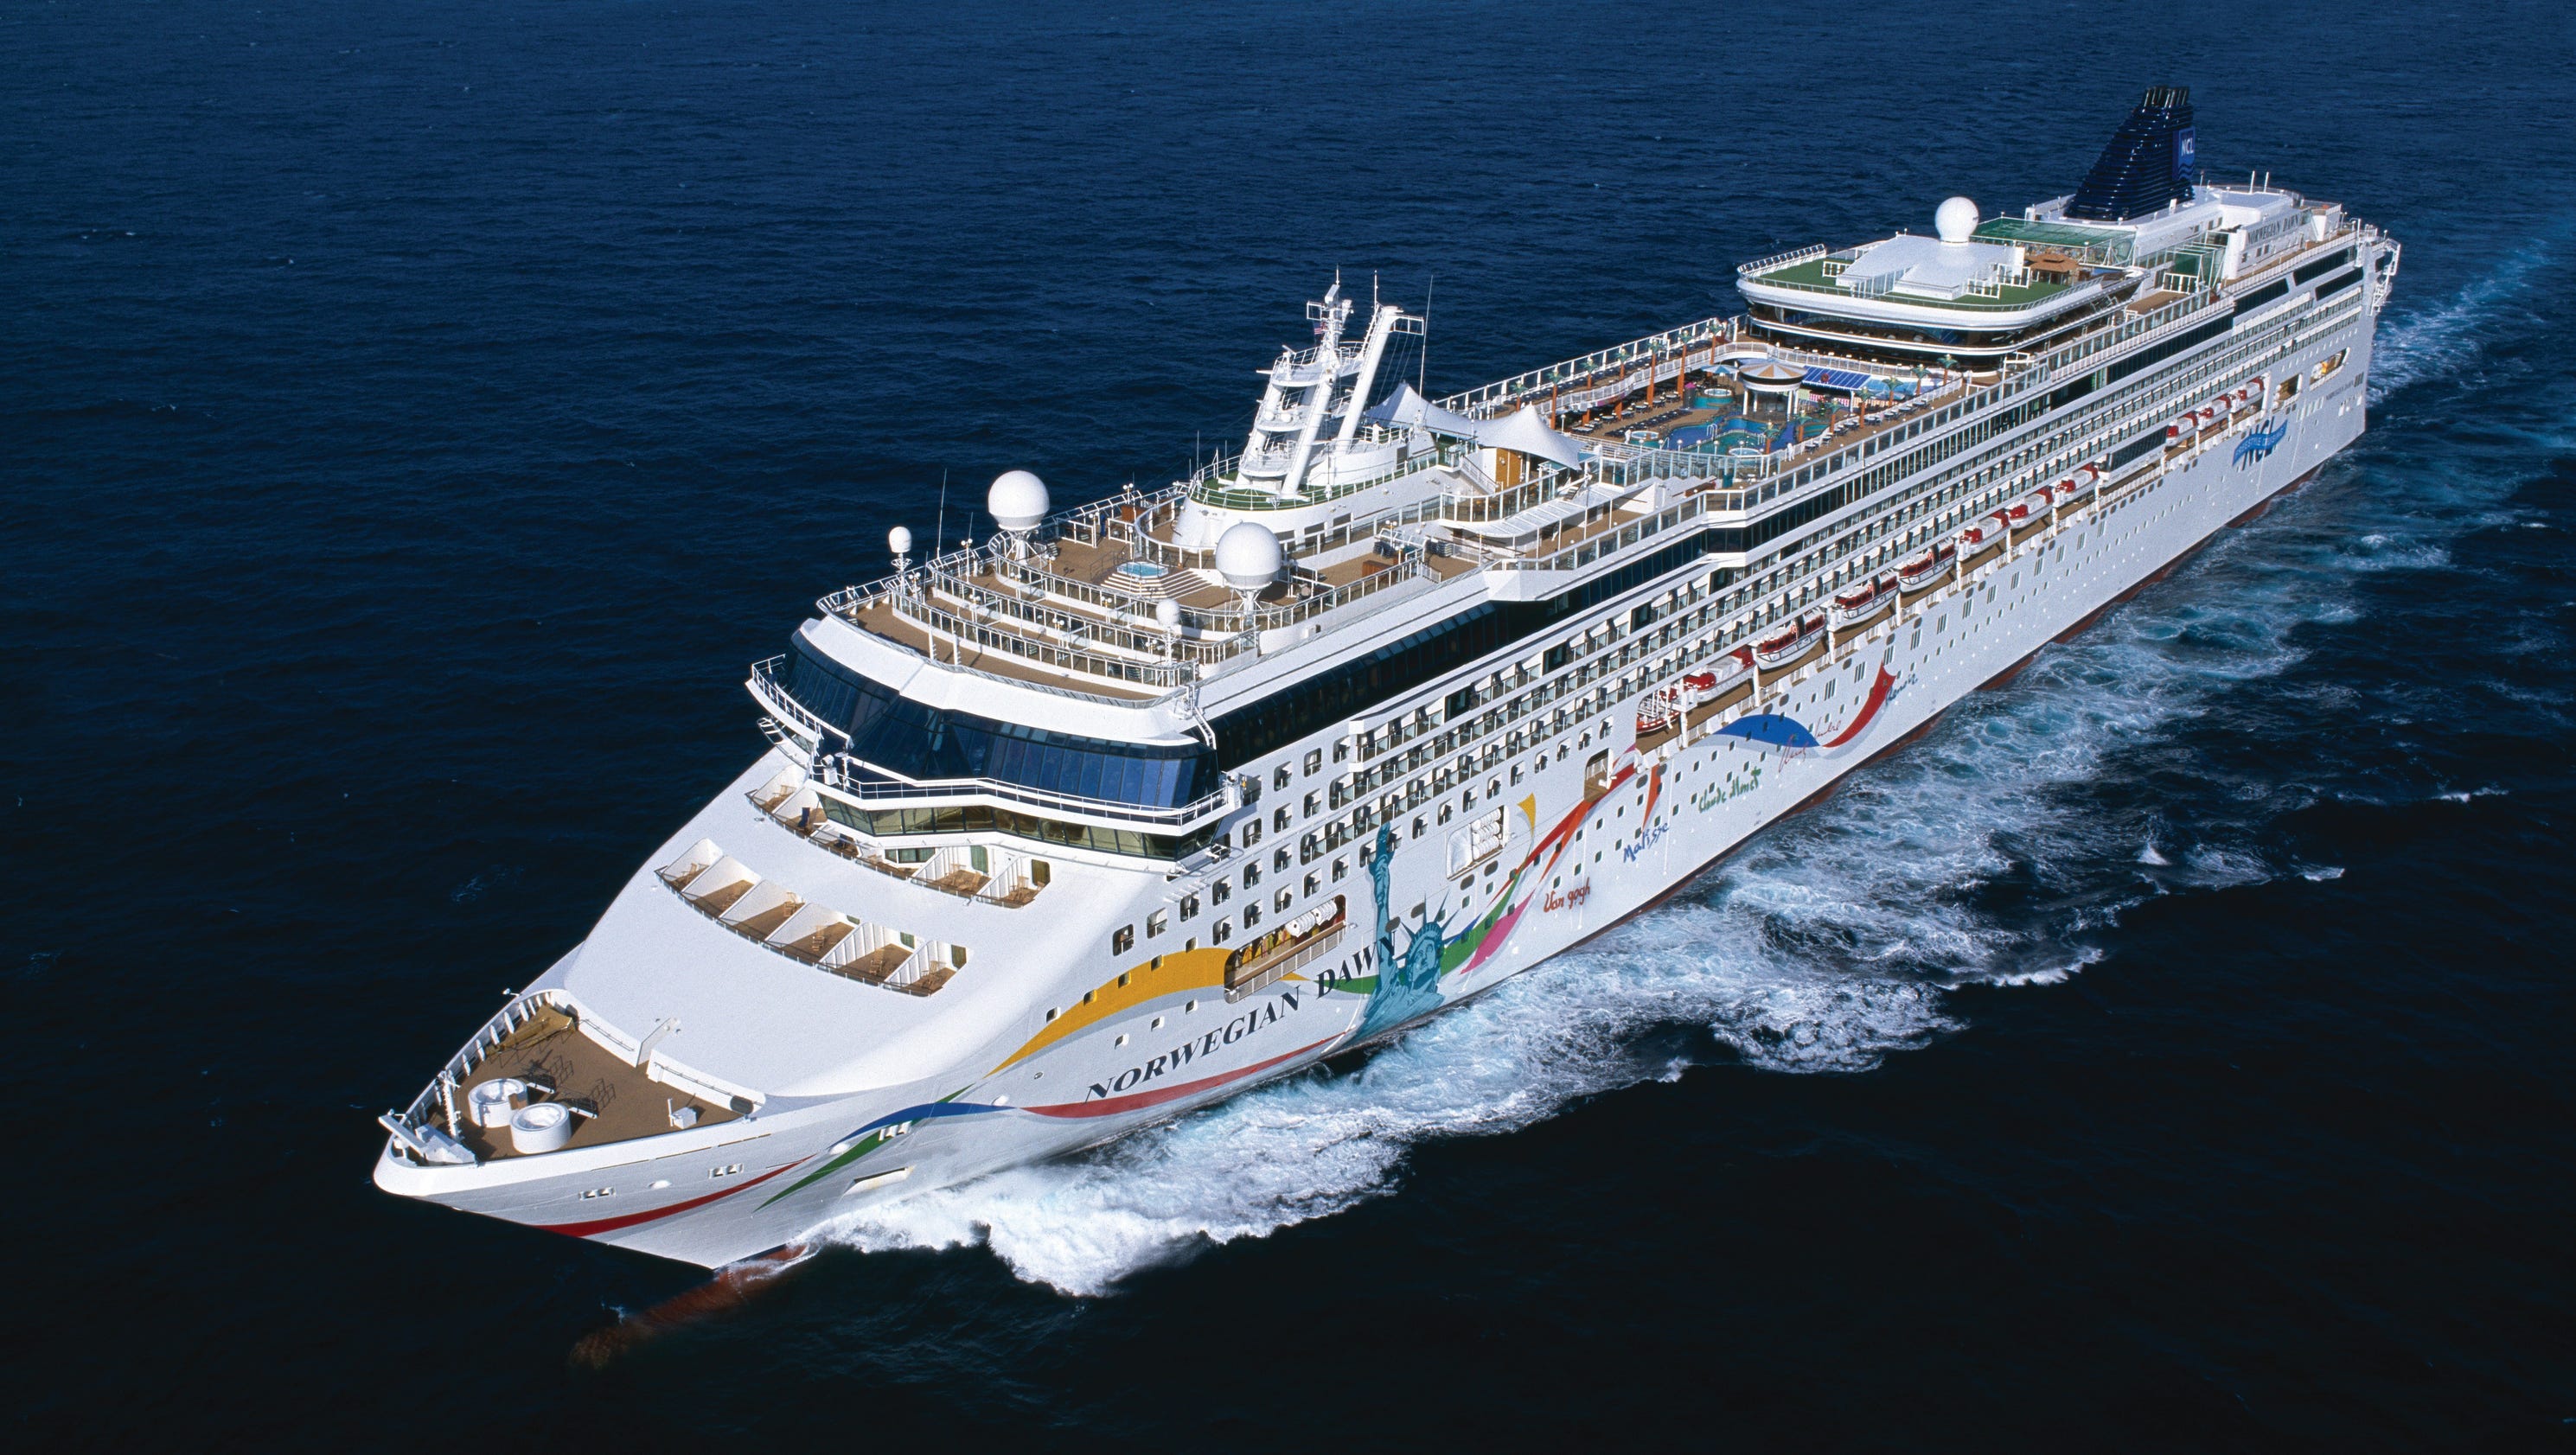 how old is the norwegian dawn cruise ship